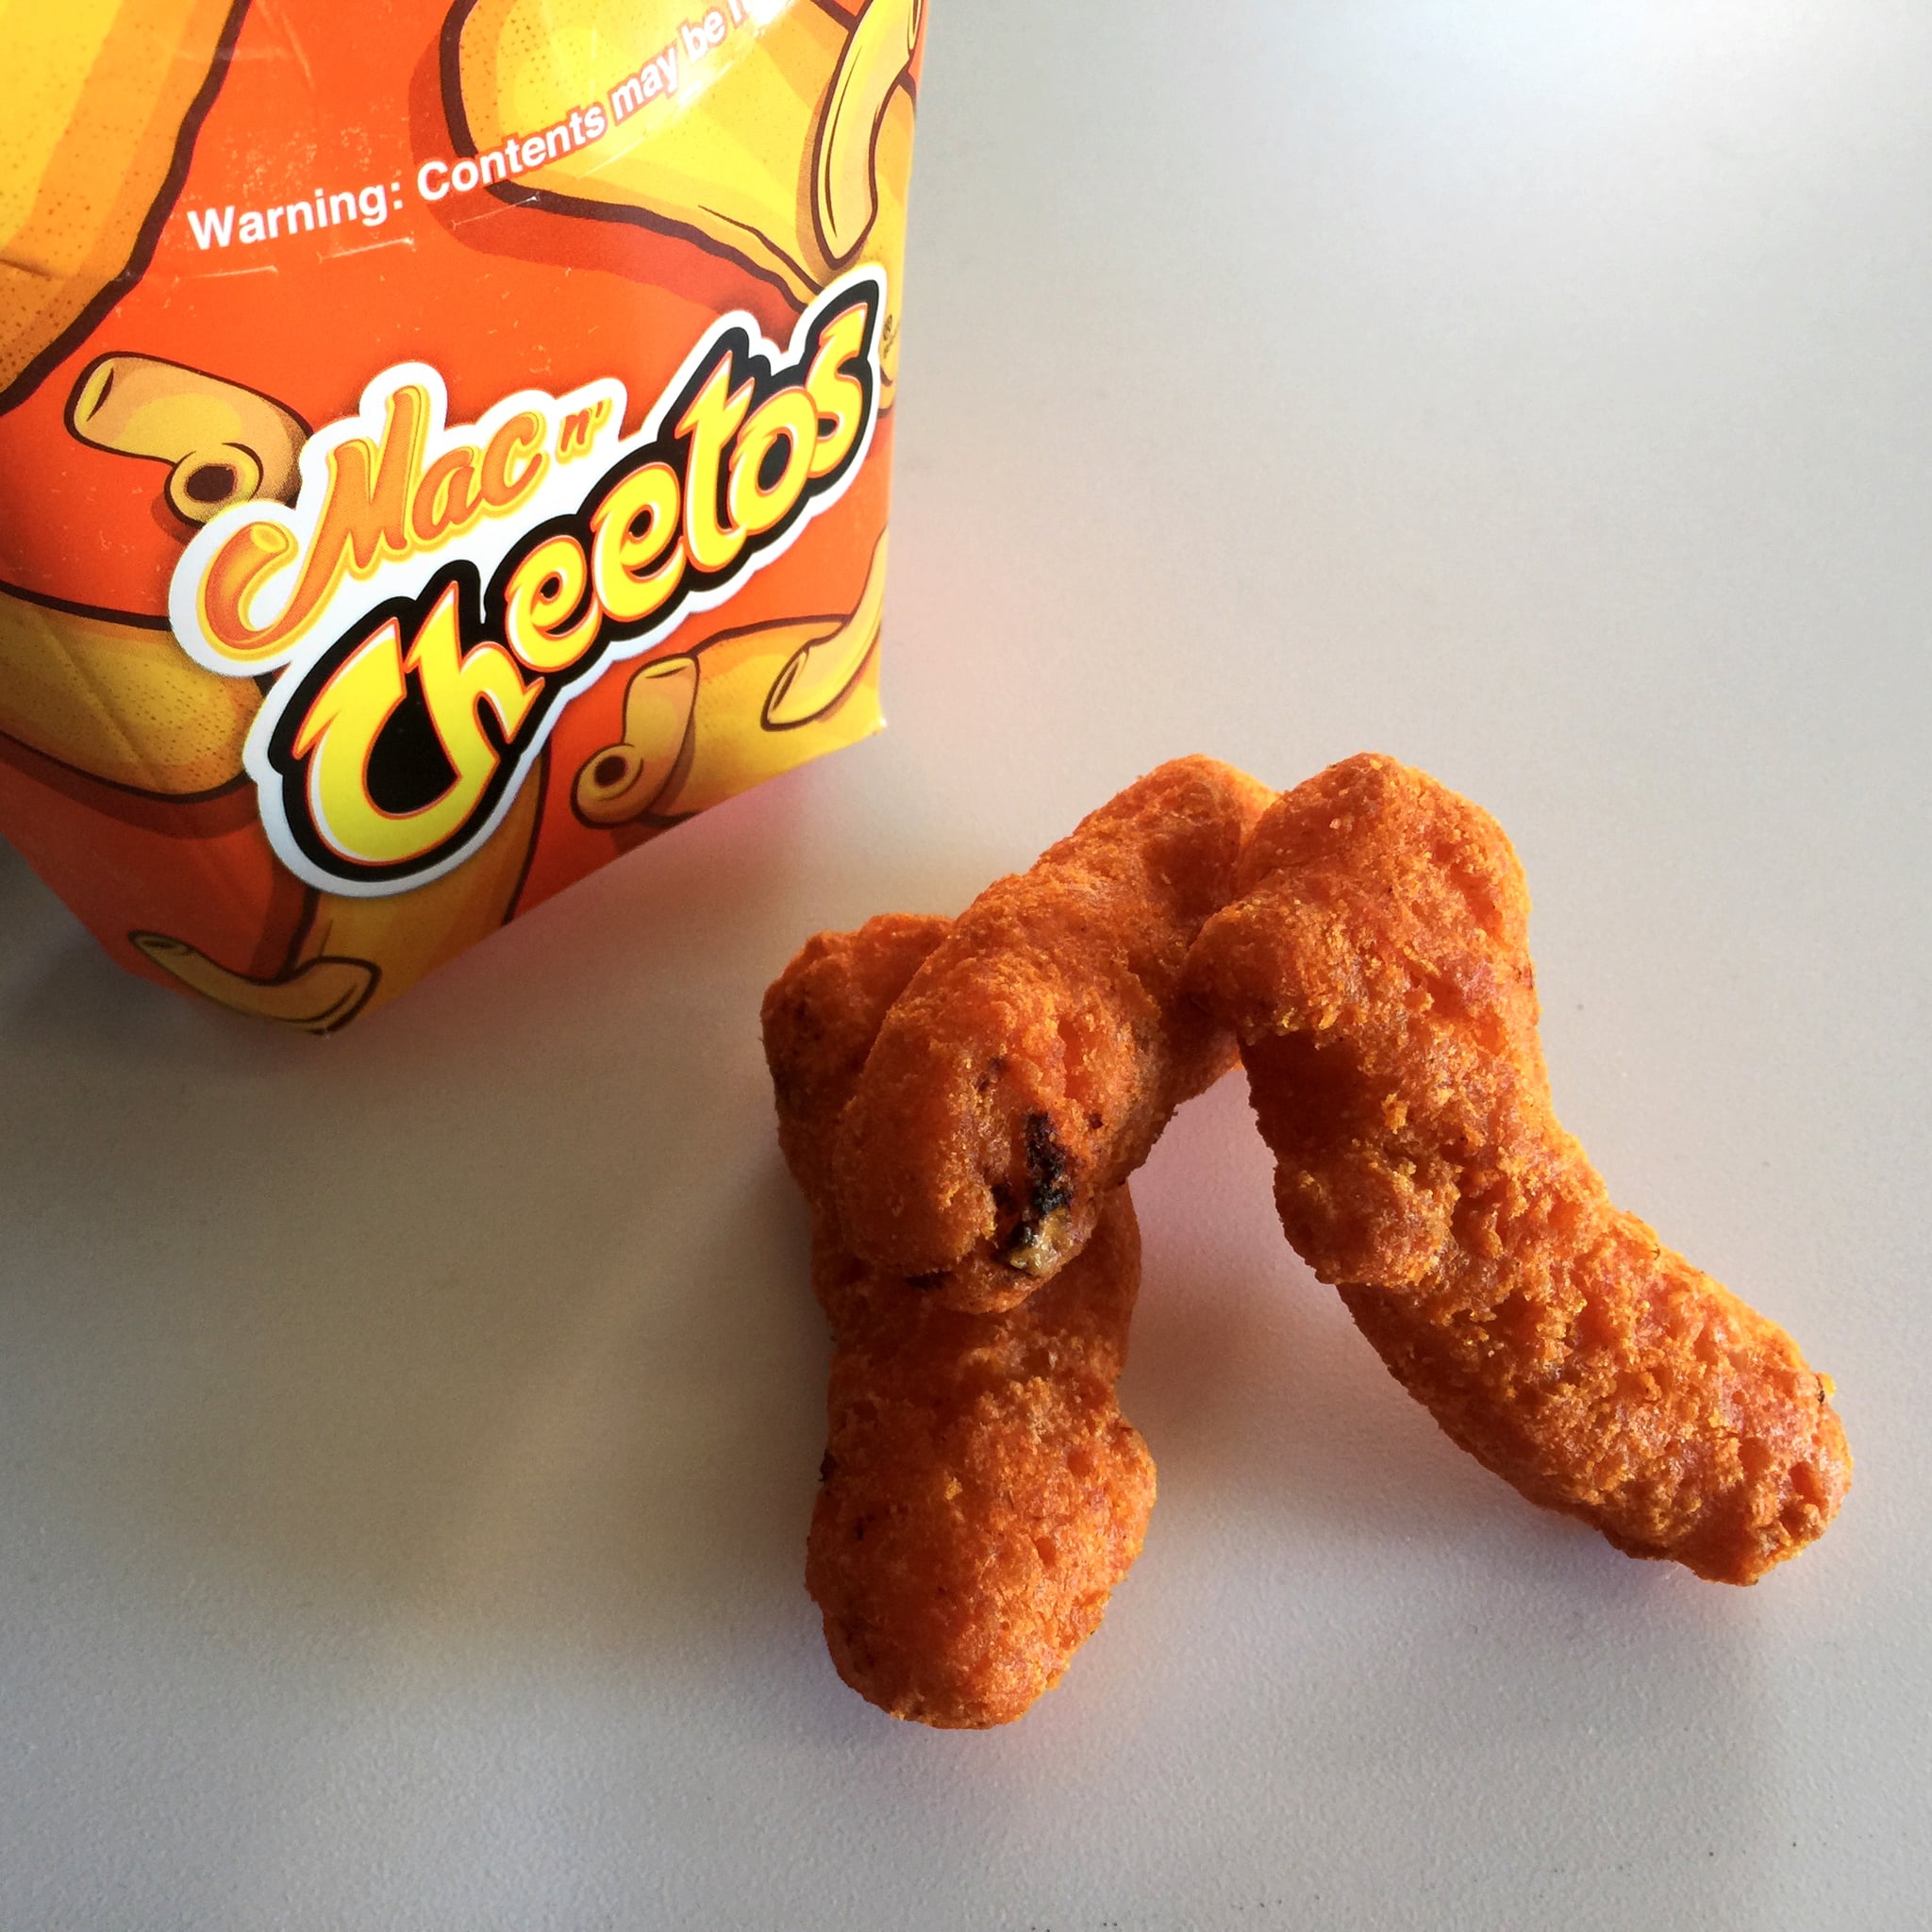 In promo shots, the Mac n' Cheetos look like Cheetos Puffs, but in rea...